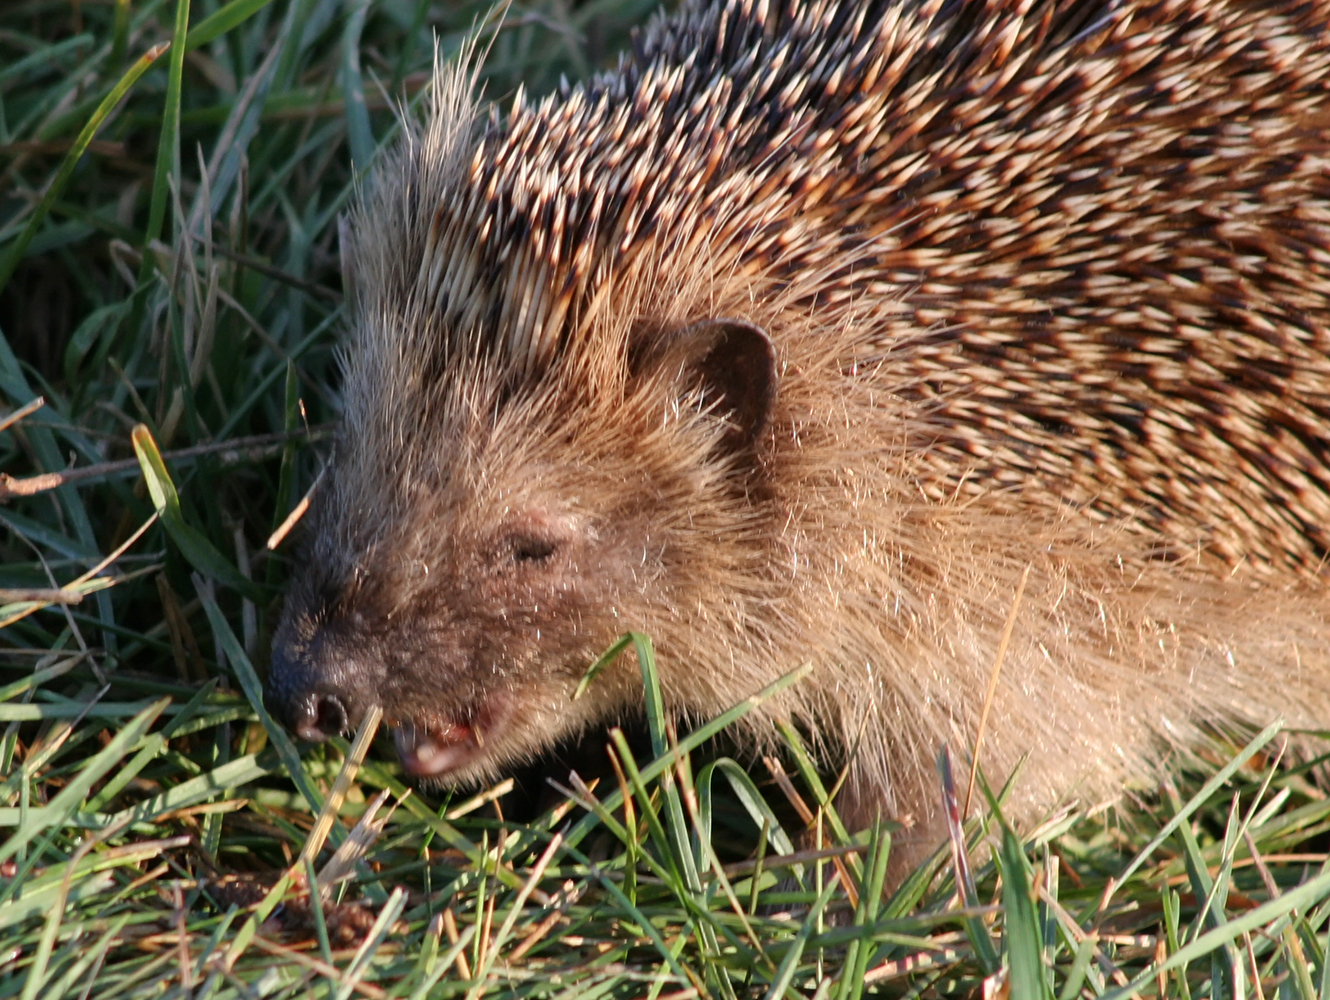 an image of a hedgehog in the grass